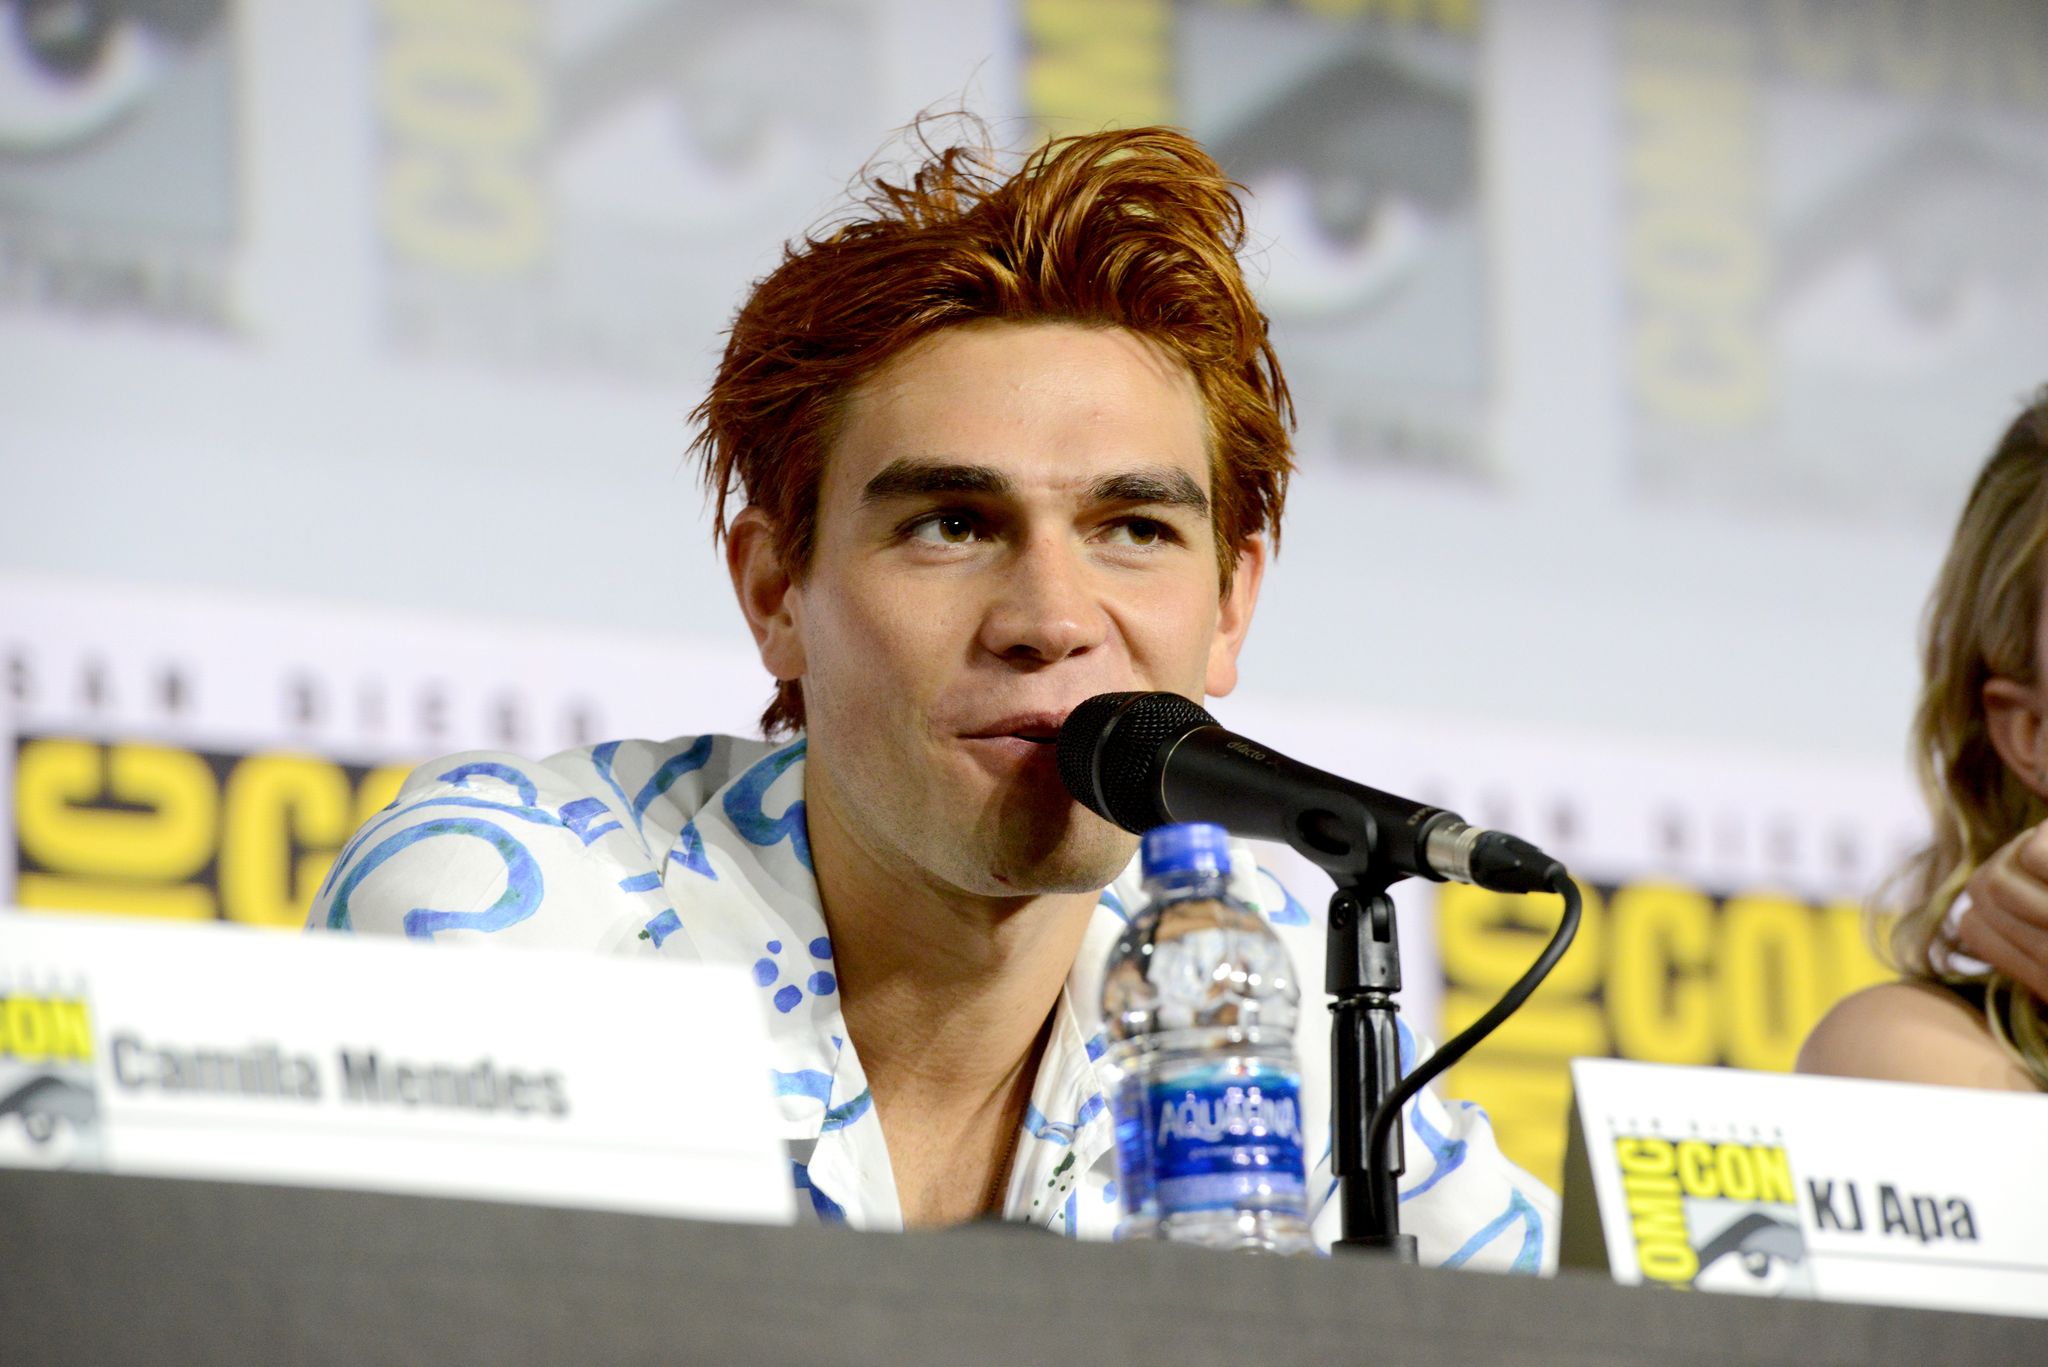 KJ Apa during the "Riverdale" Special Video Presentation and Q&A during 2019 Comic-Con International at San Diego Convention Center on July 21, 2019 in San Diego, California. | Source: Getty Images